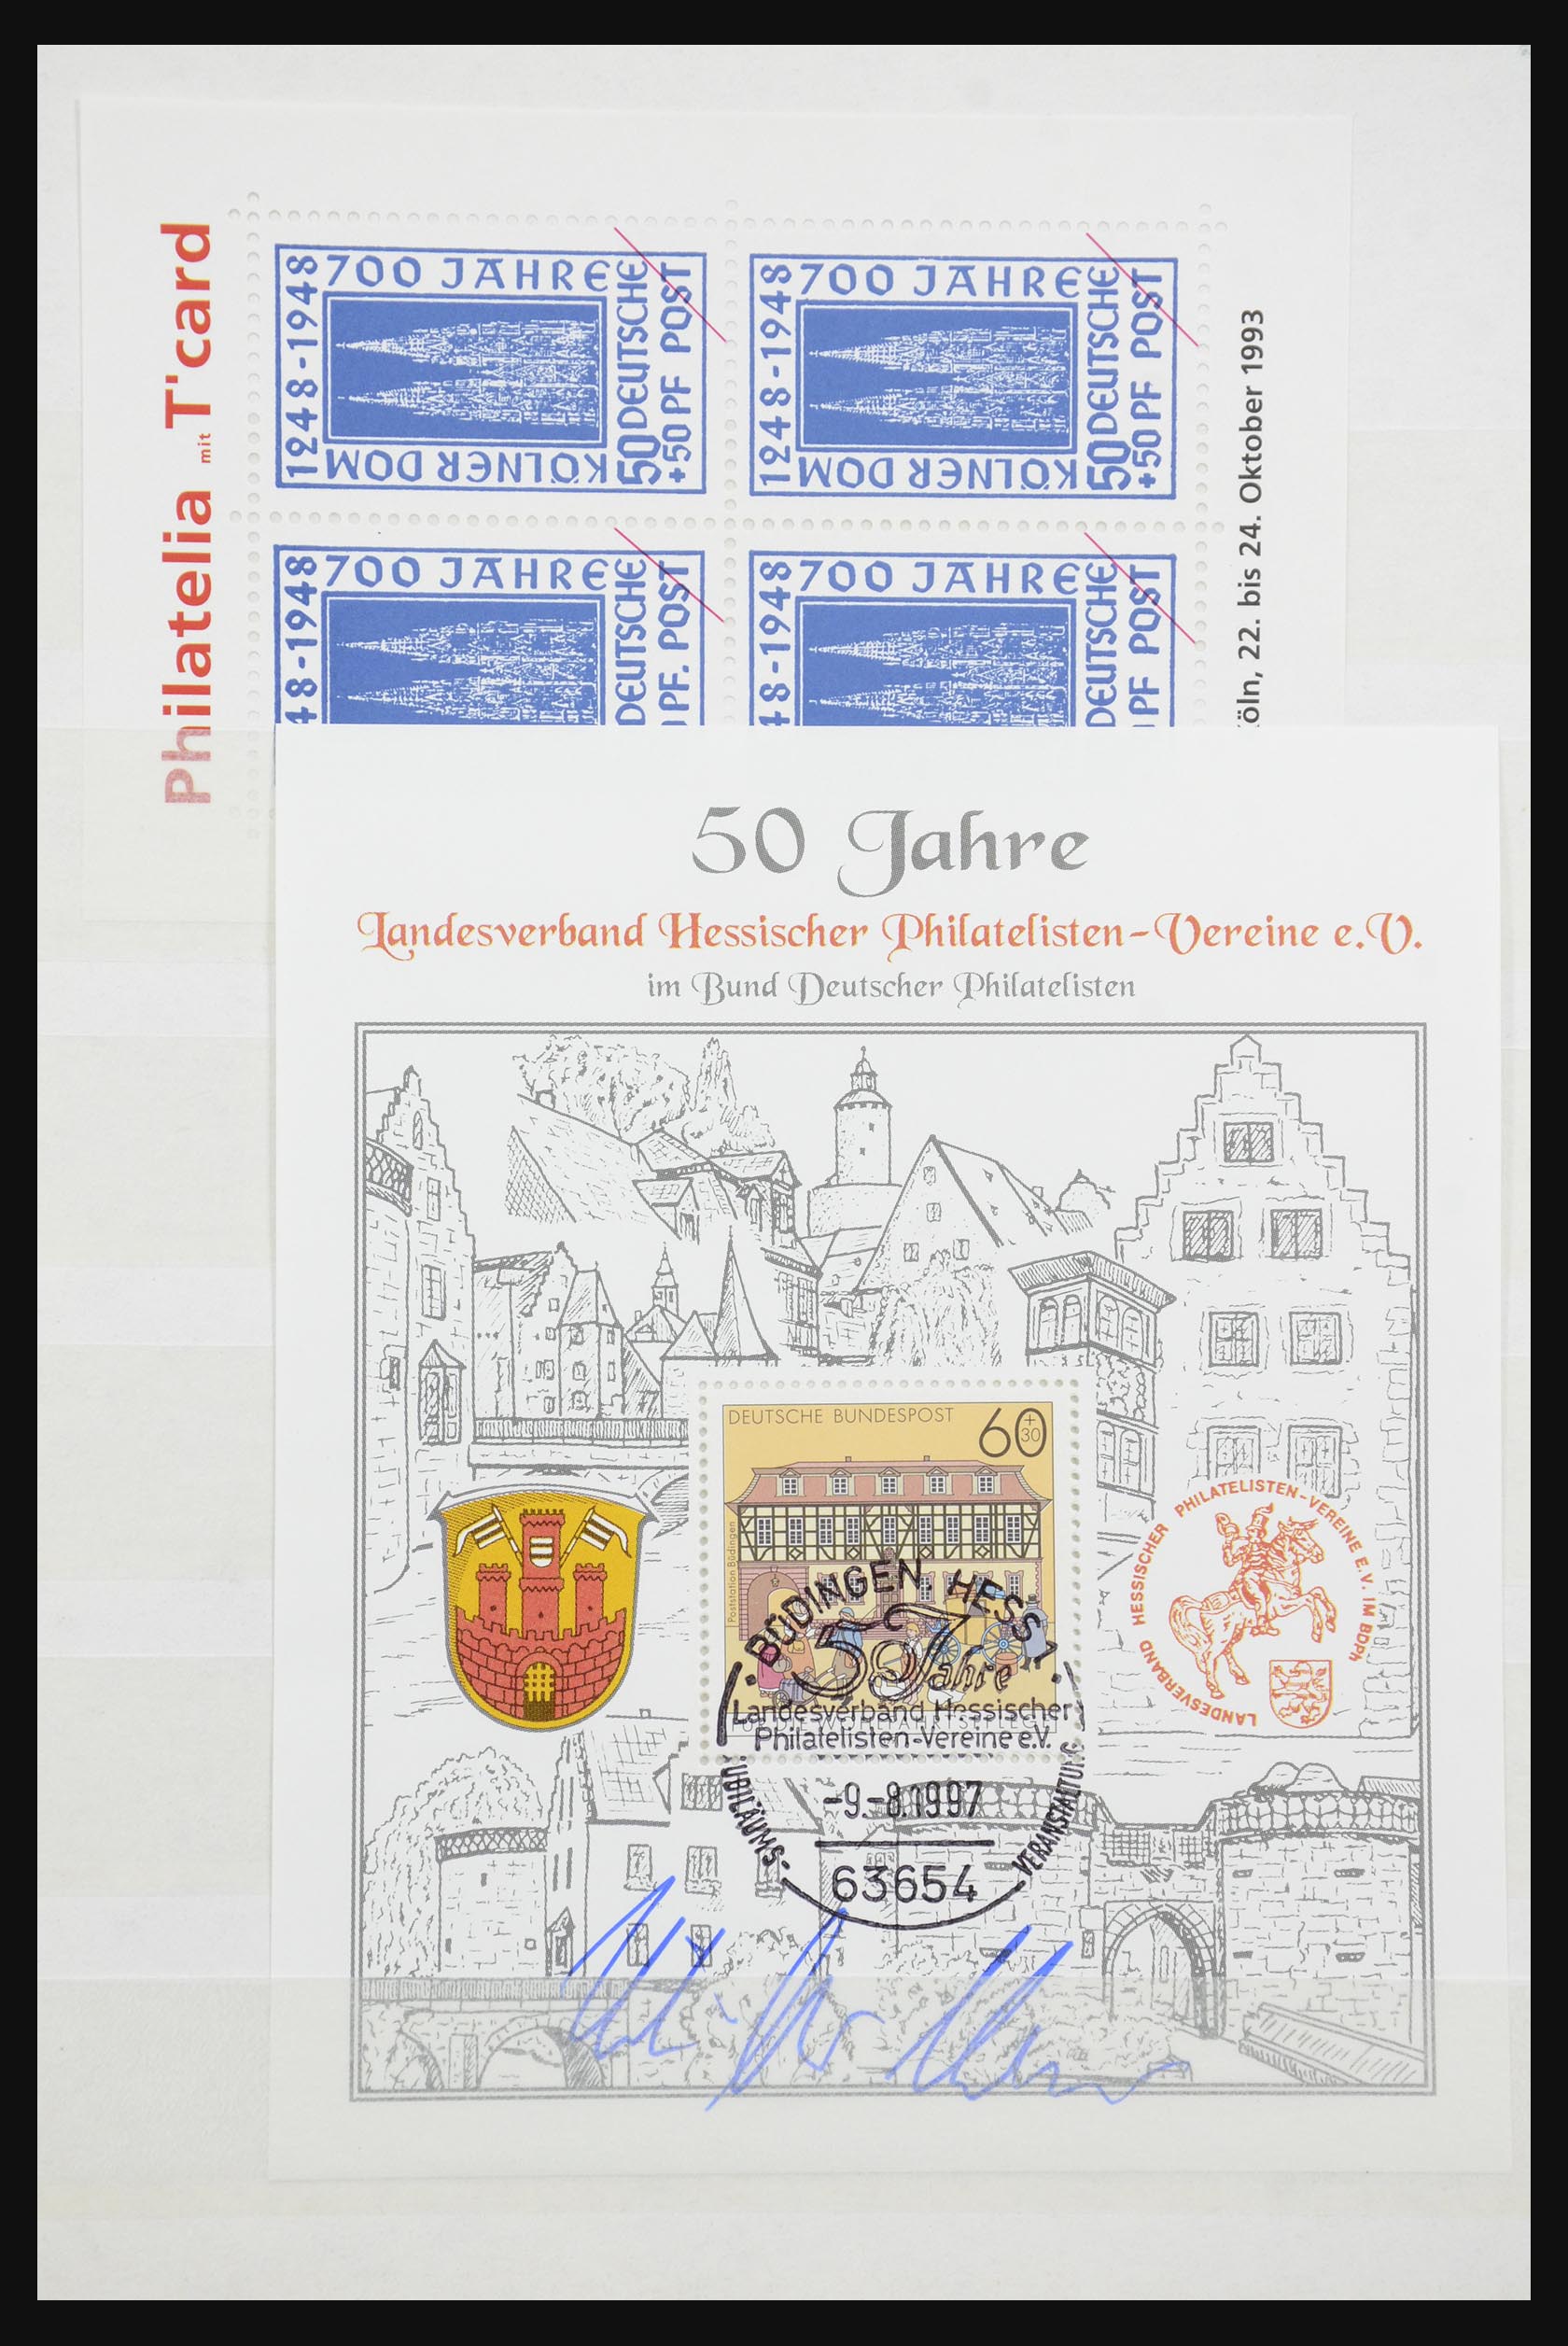 32050 050 - 32050 Bundespost special sheets 1980-2010.